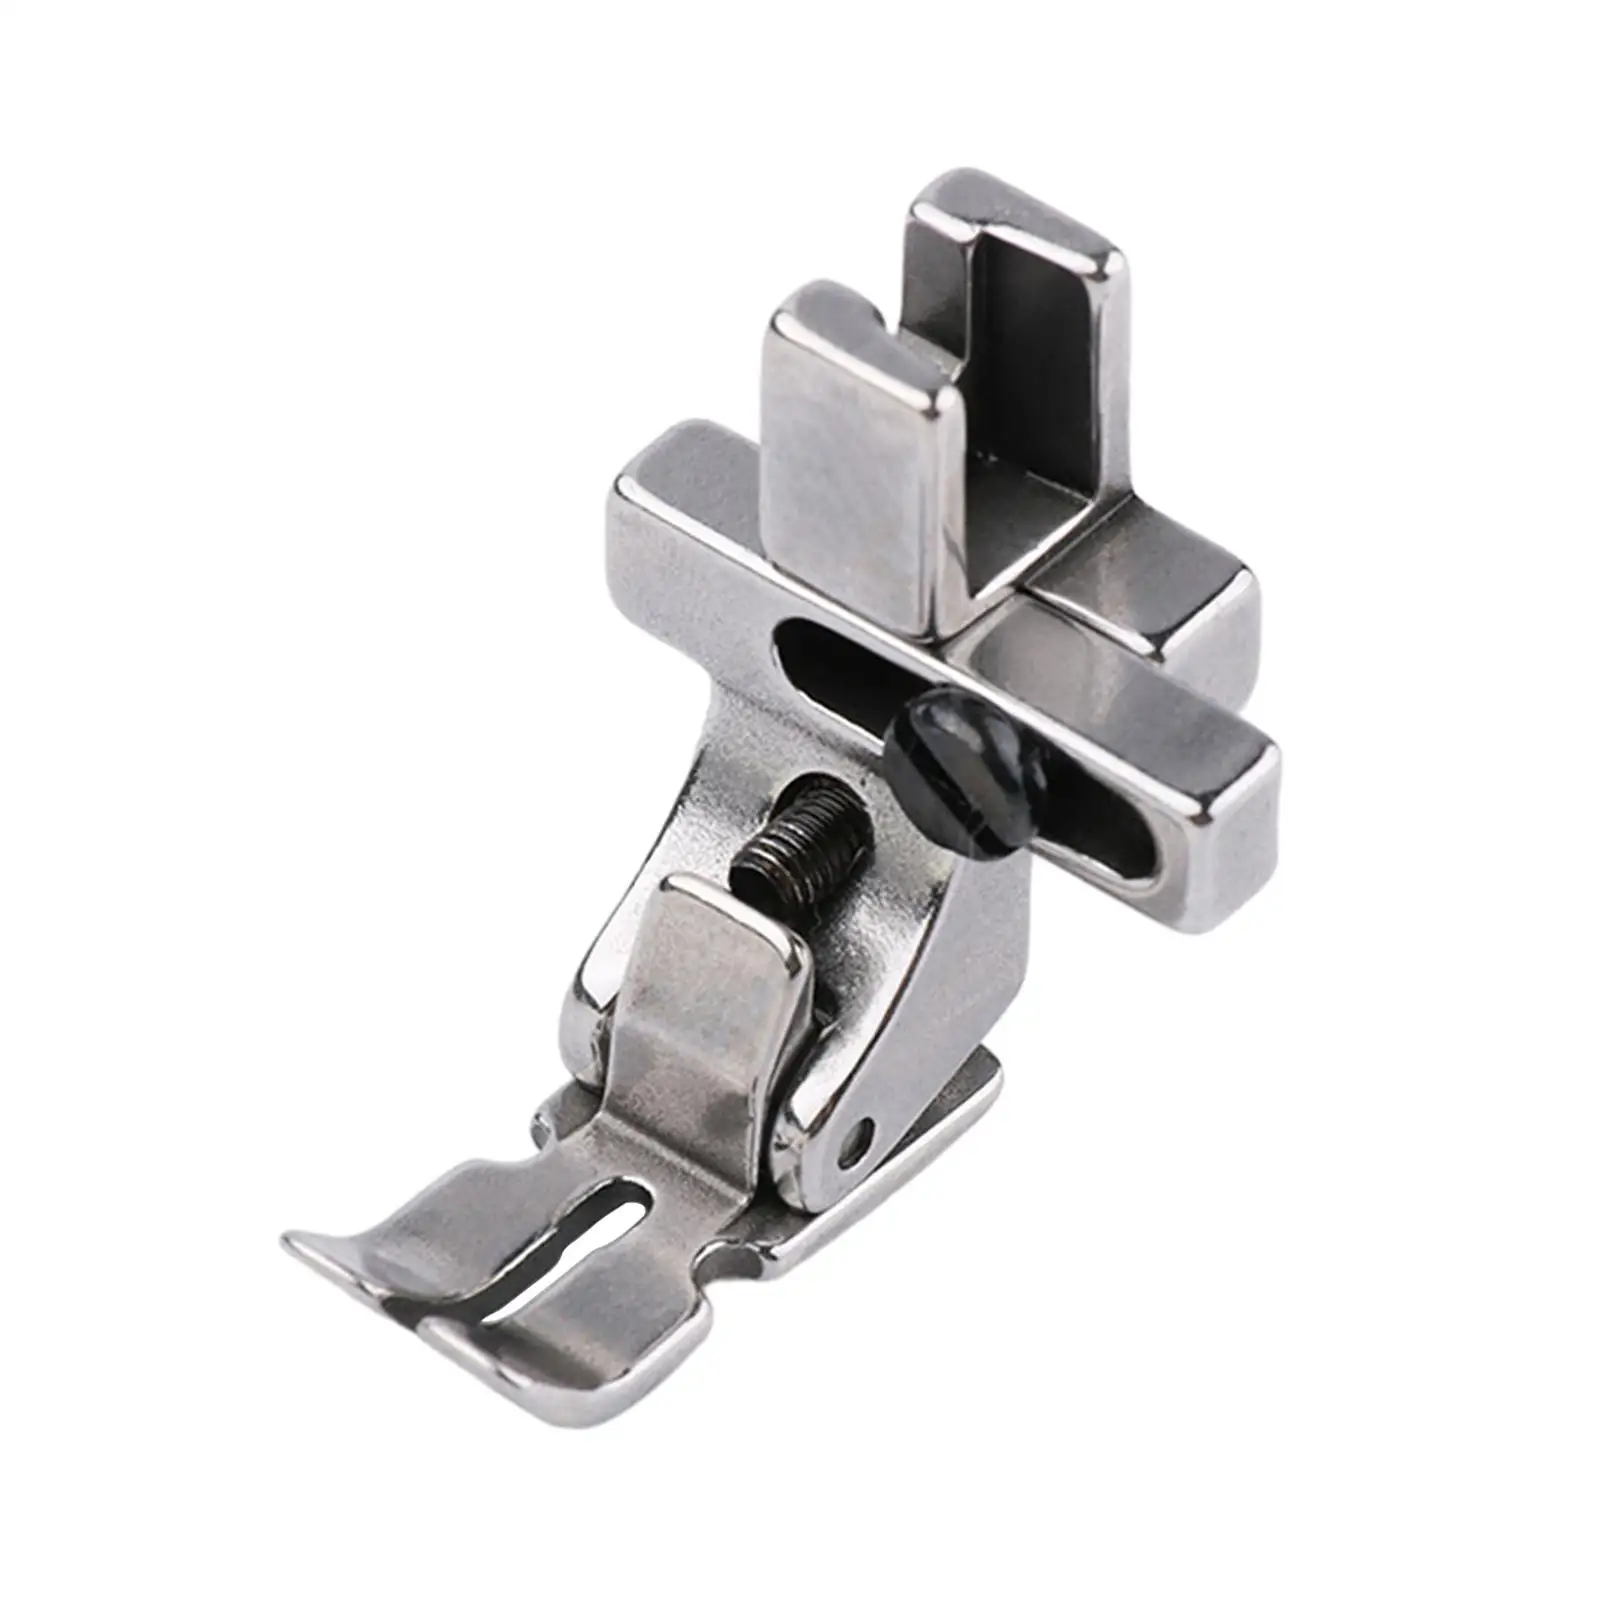 Presser Foot 4 in 1 Folding Position Adjustable Edge Guide Foot Hem Foot Parts for Flat Car Stitching Overlock DIY Crafts Fabric